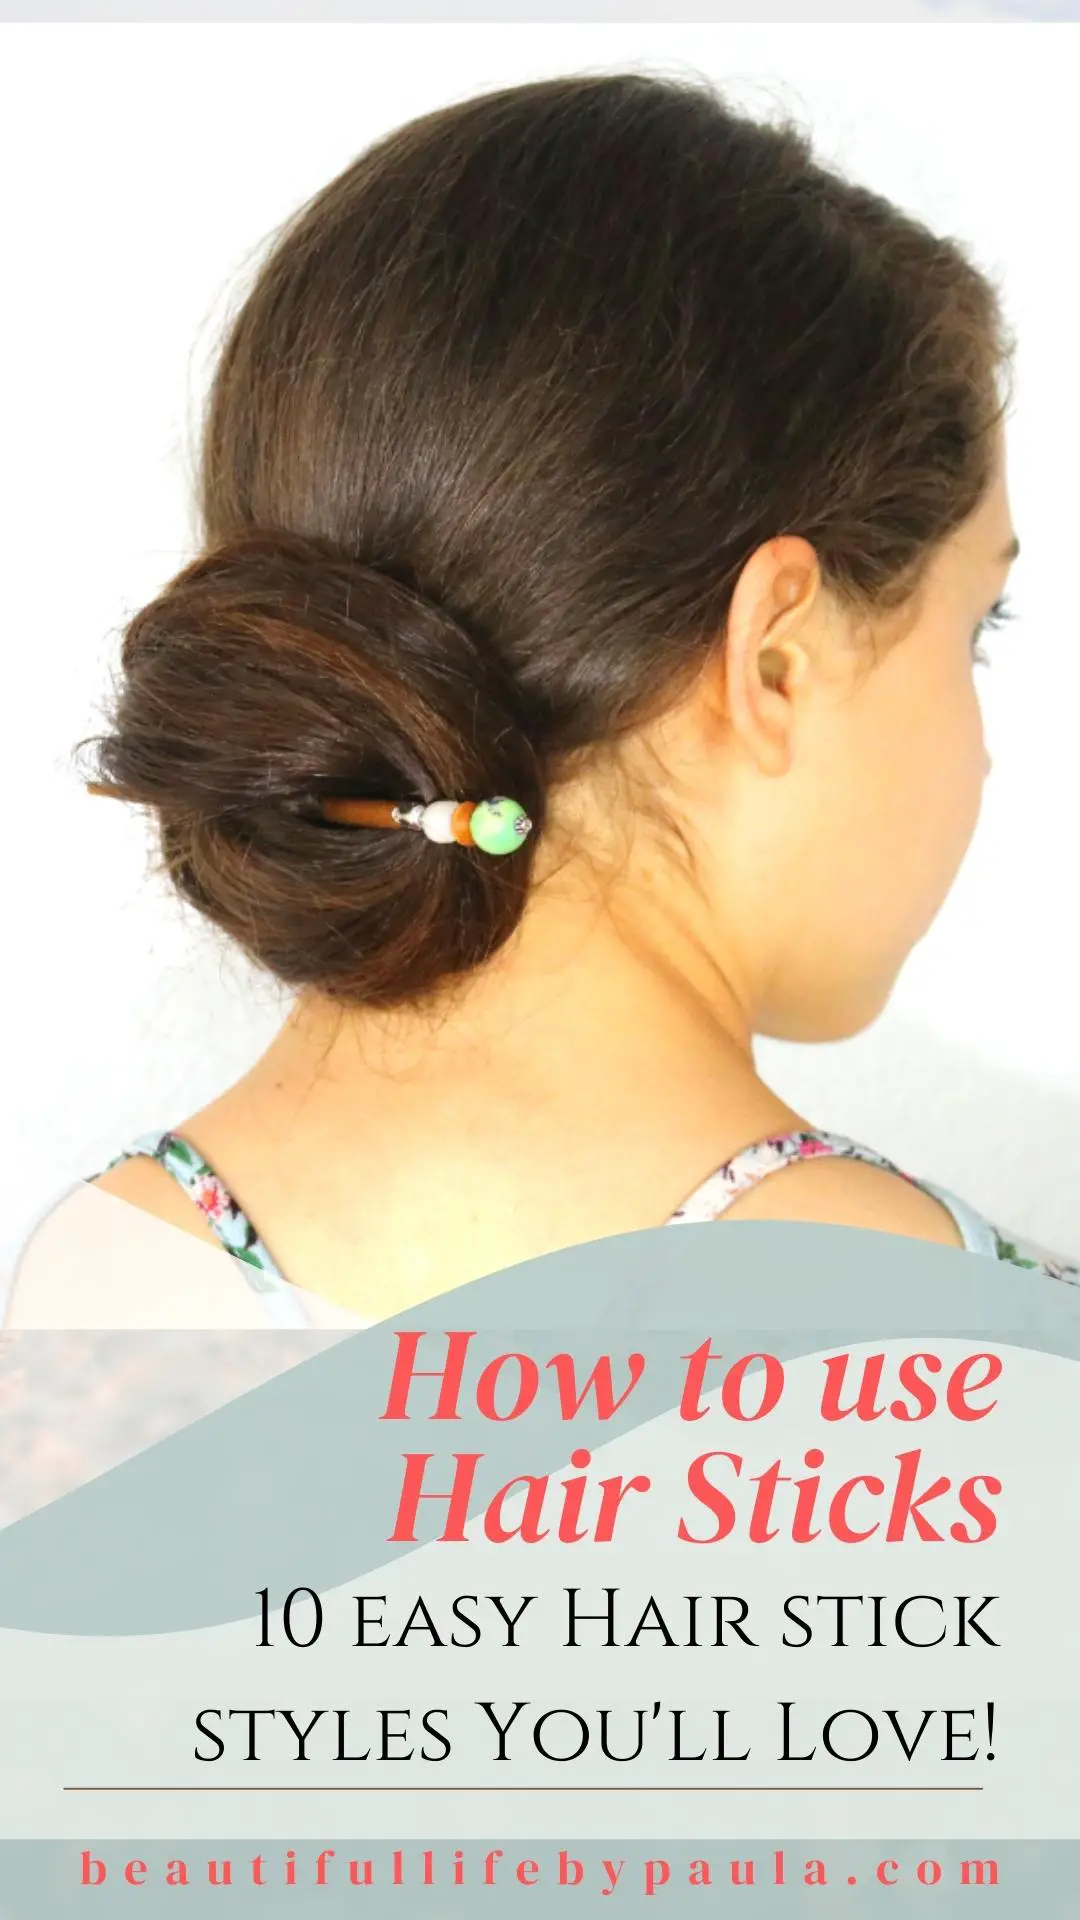 How to use hair sticks hair stick styles